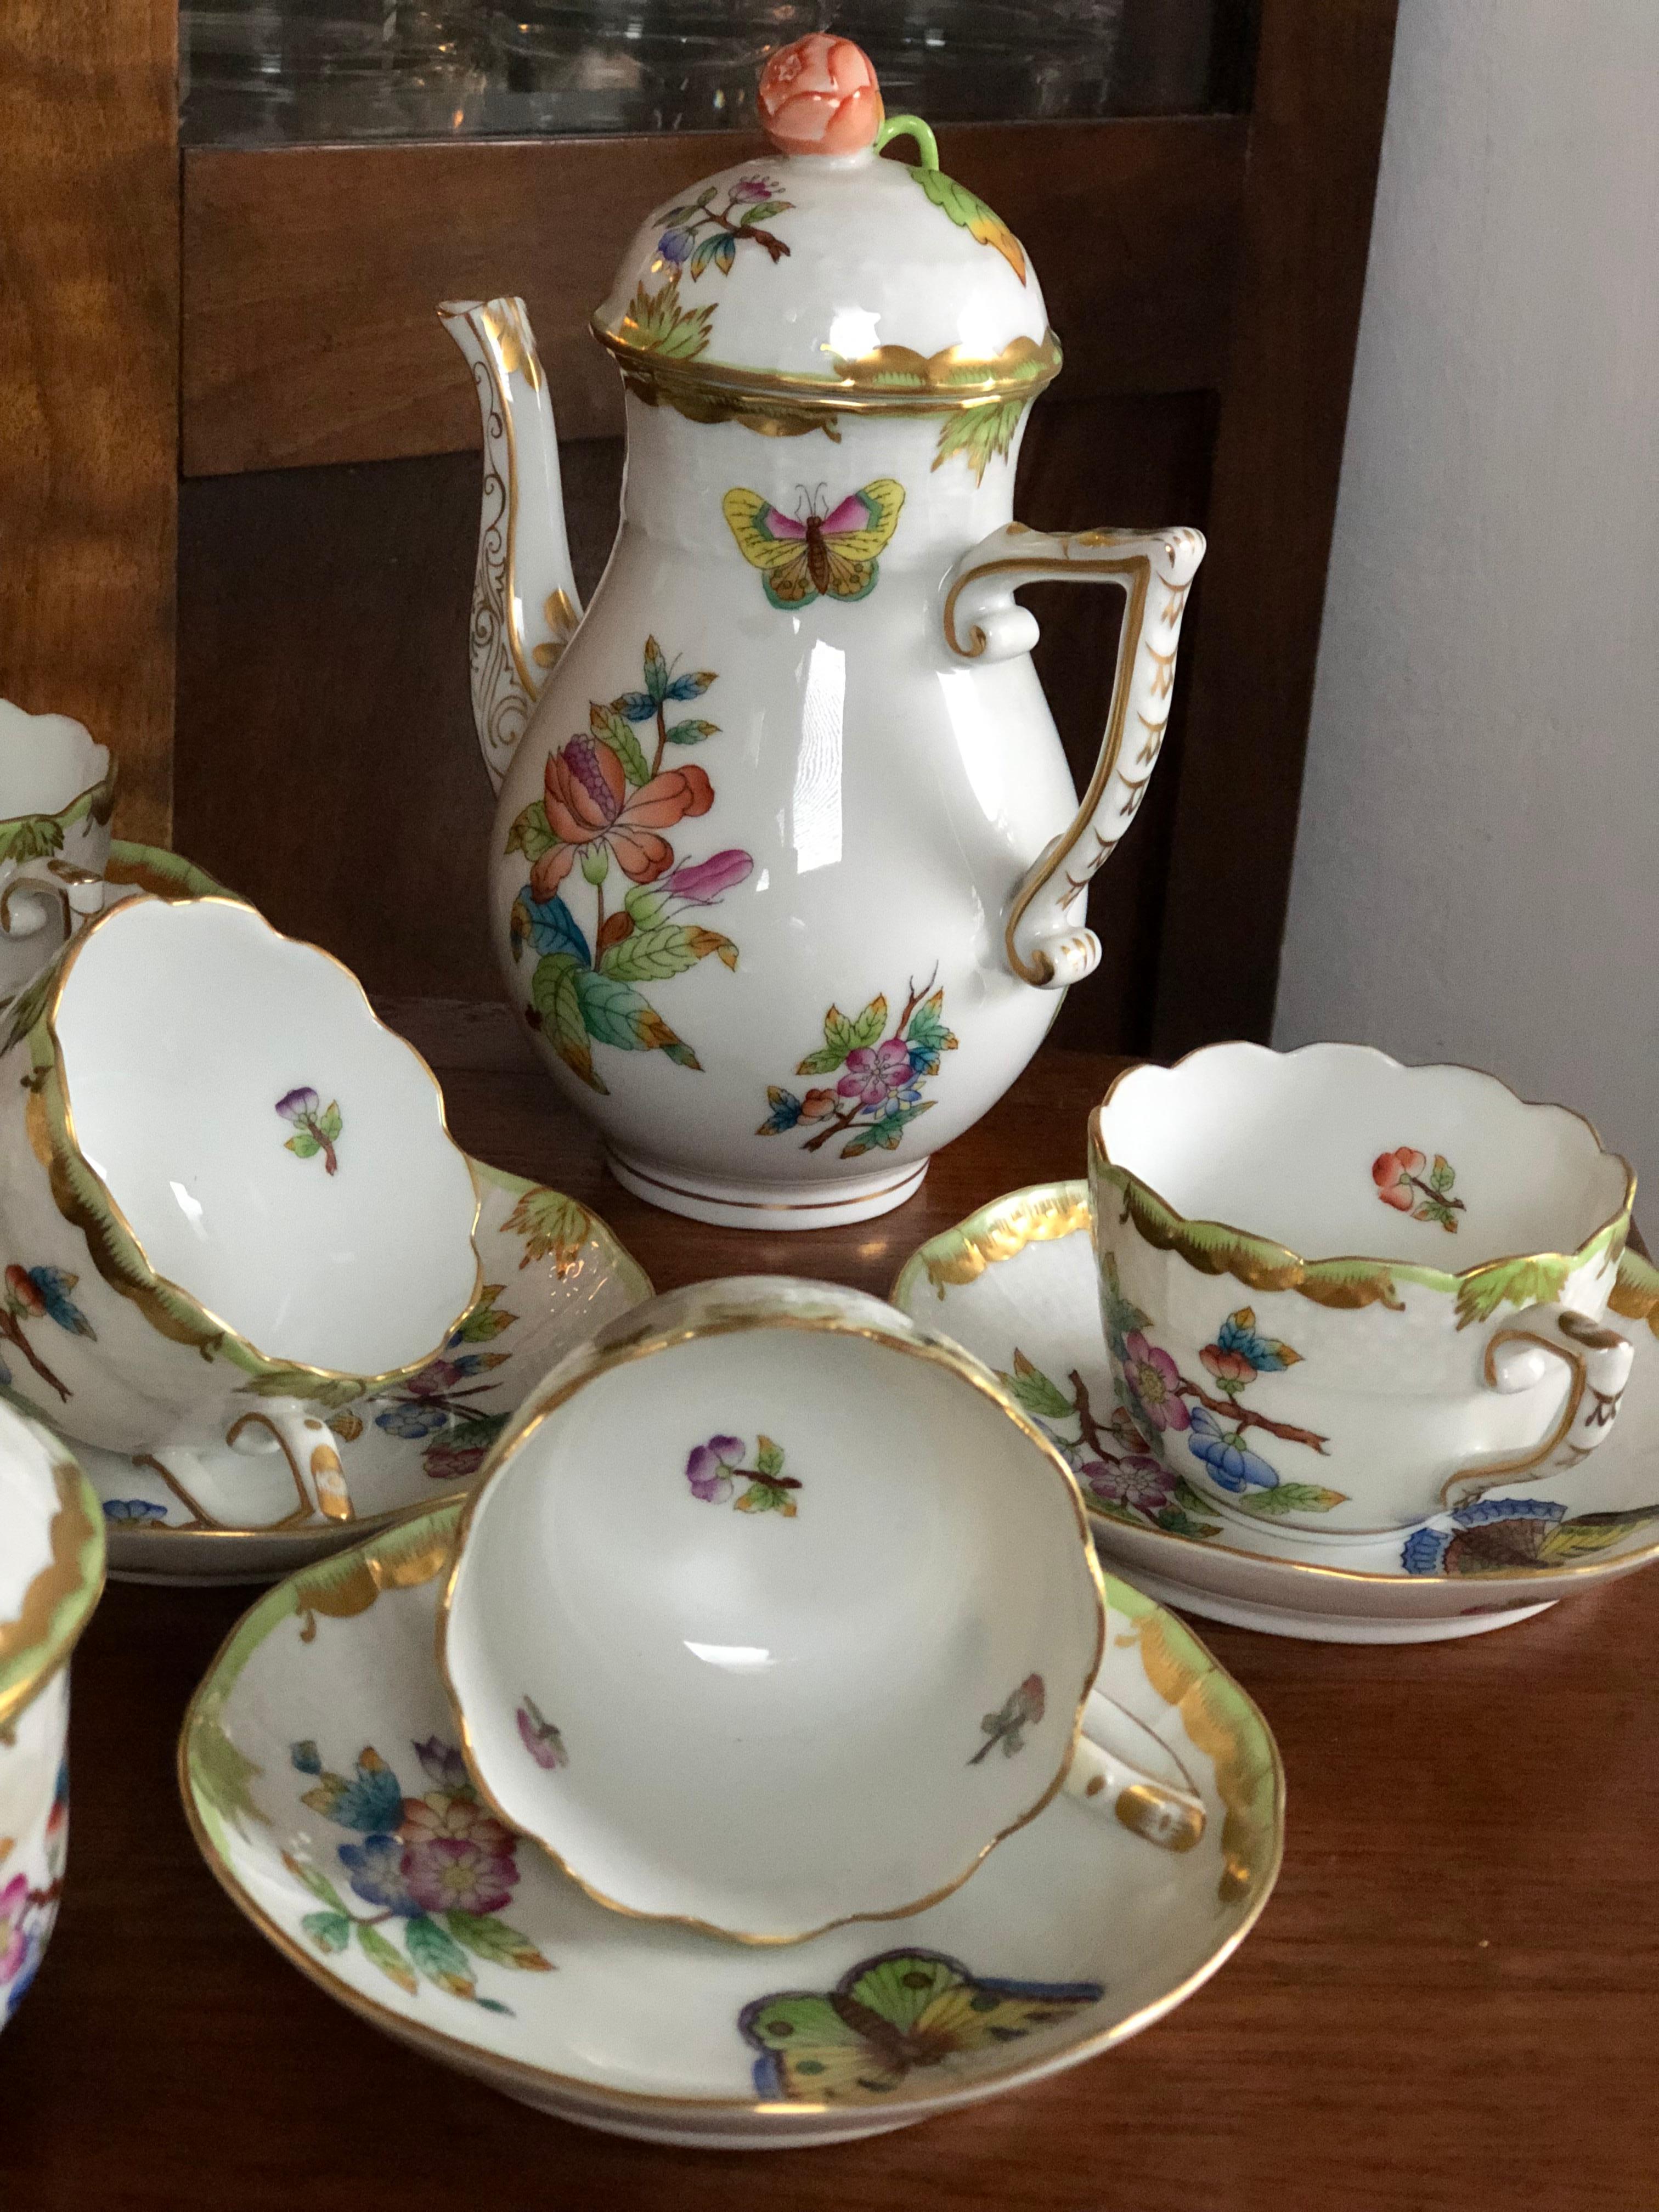 Hungarian Herend Queen Victoria Porcelain Coffee or Tea Set for Six Persons